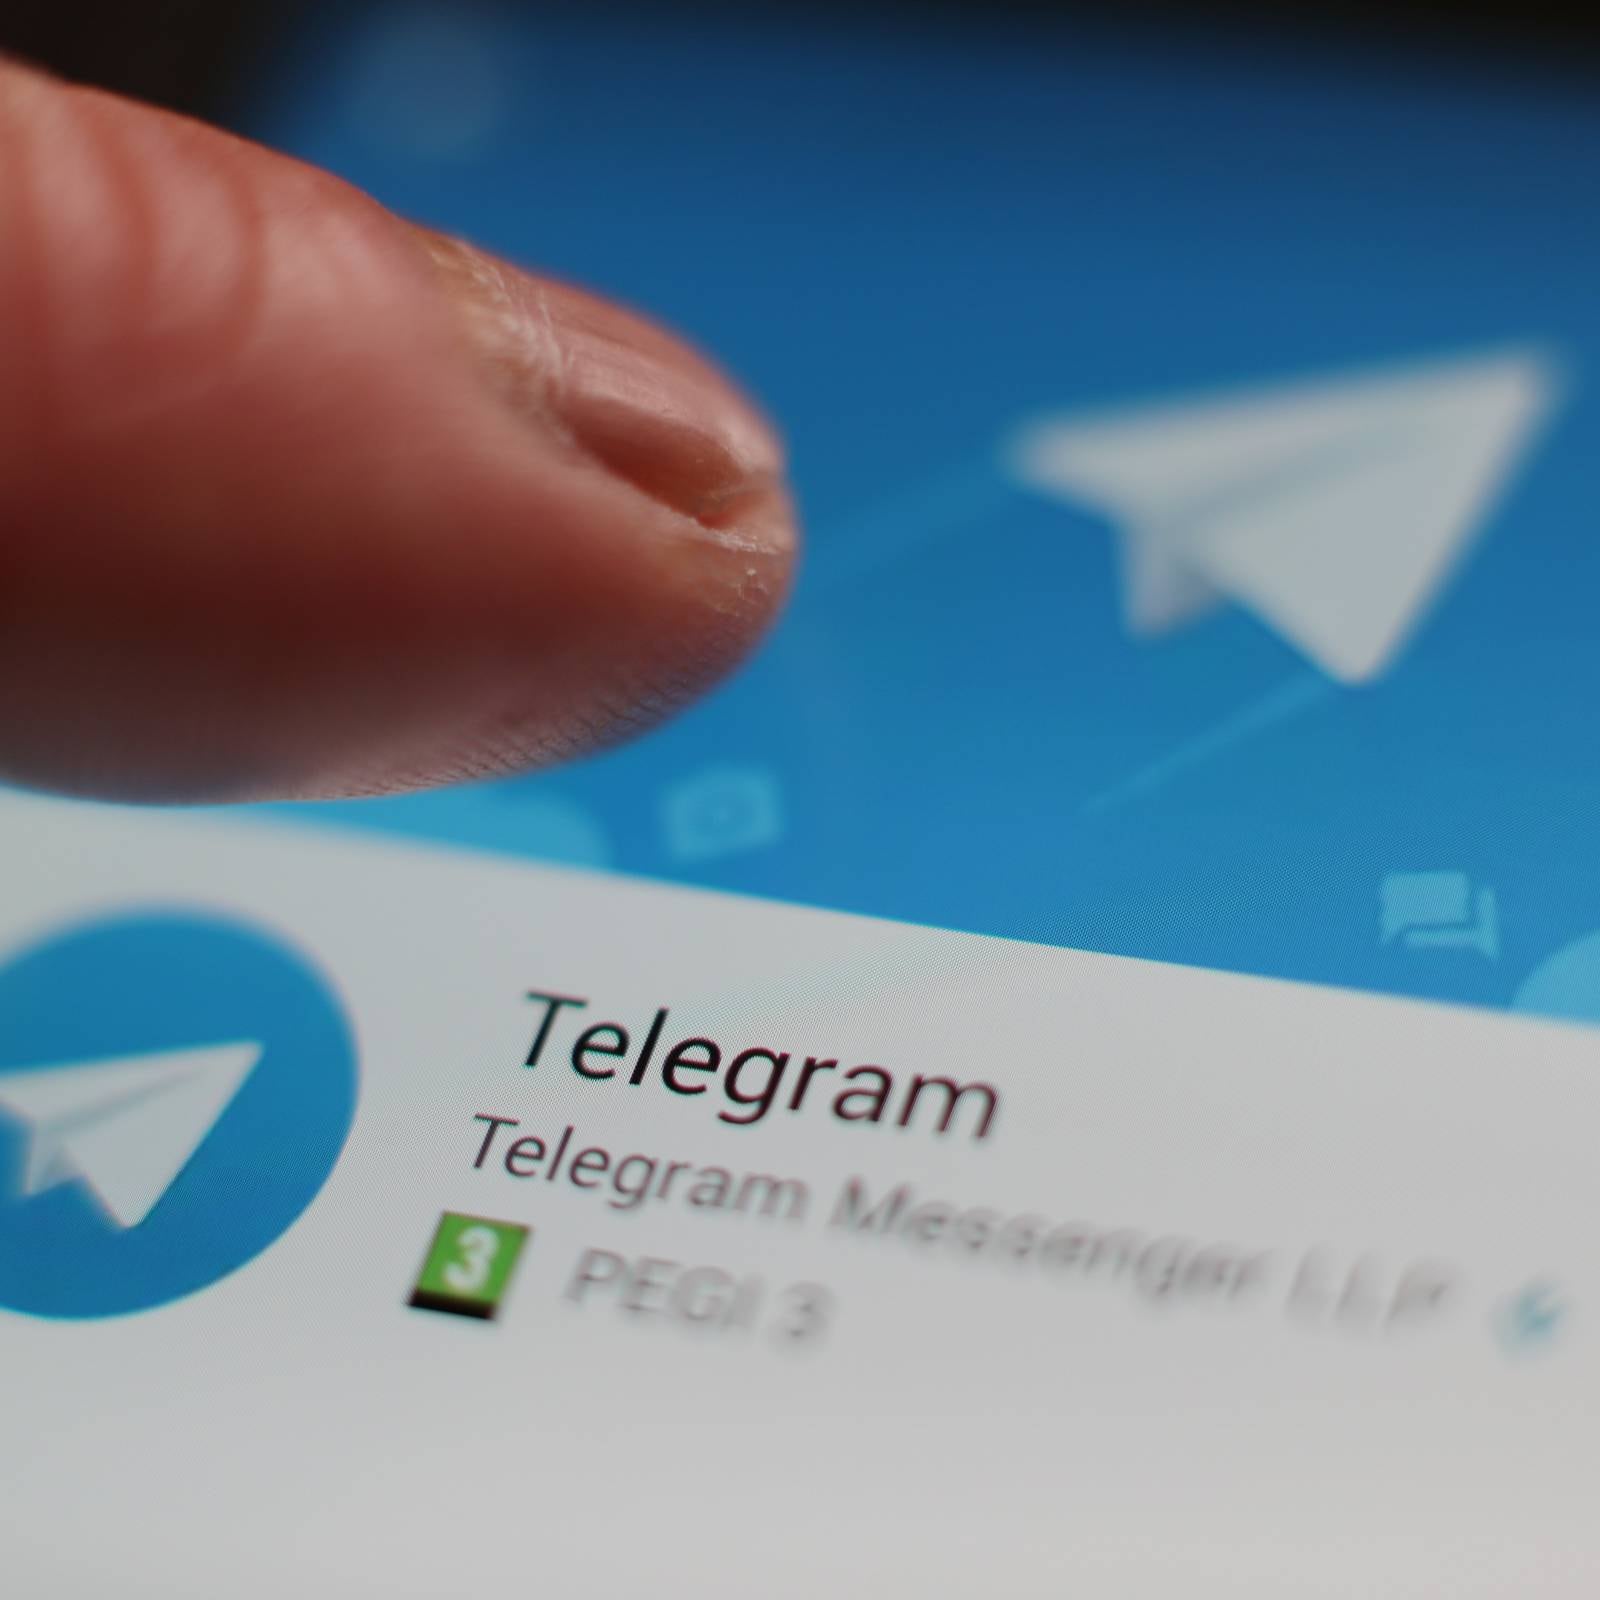 Telegram IPO a possibility as platform hits 900 million users